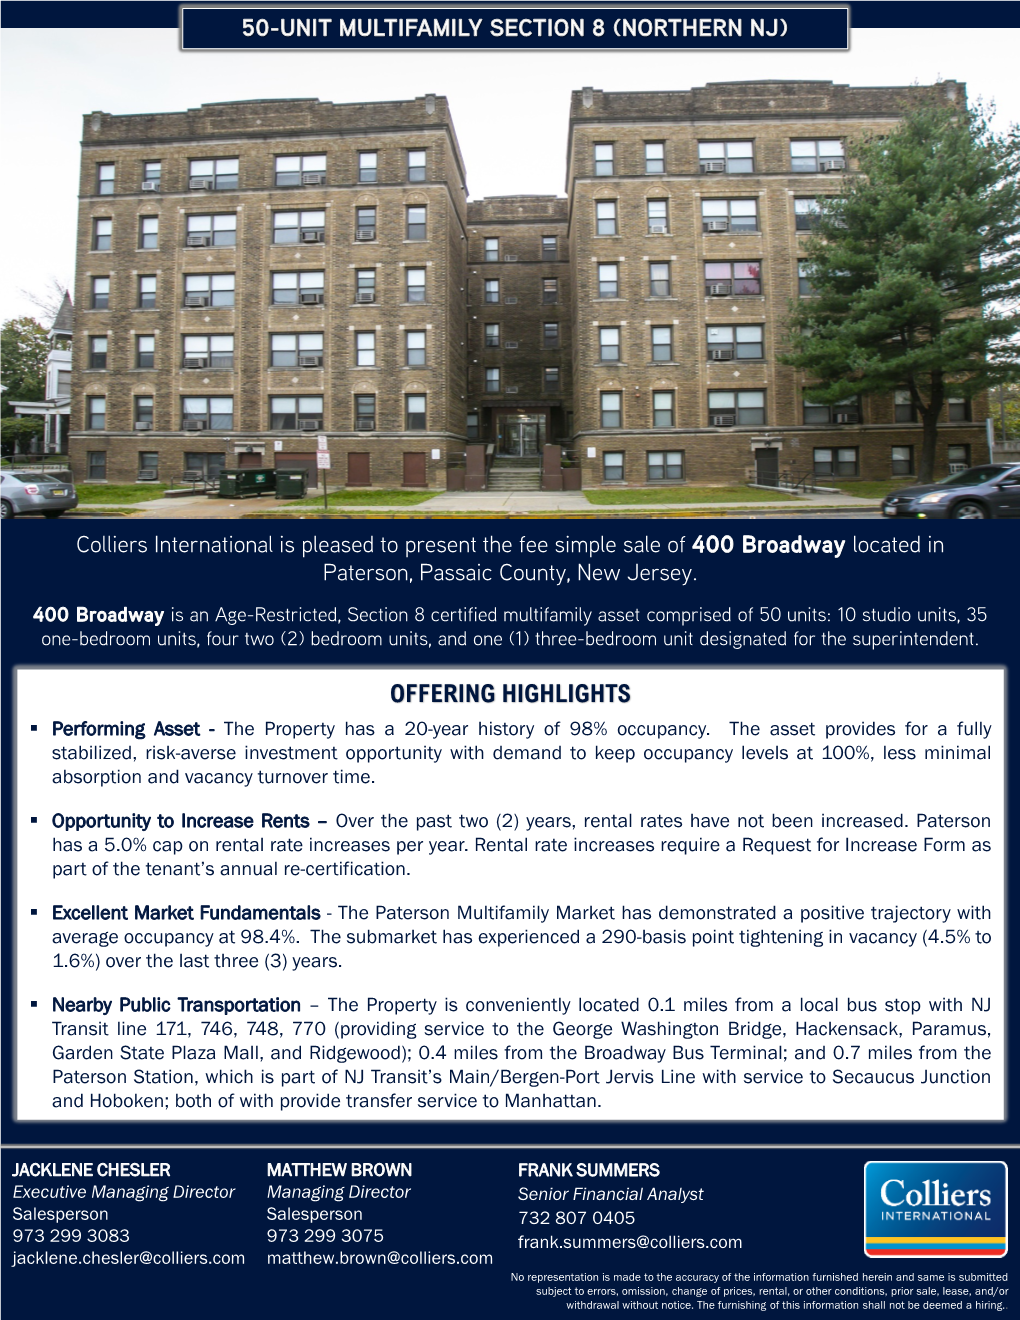 Colliers International Is Pleased to Present the Fee Simple Sale of 400 Broadway Located in Paterson, Passaic County, New Jersey